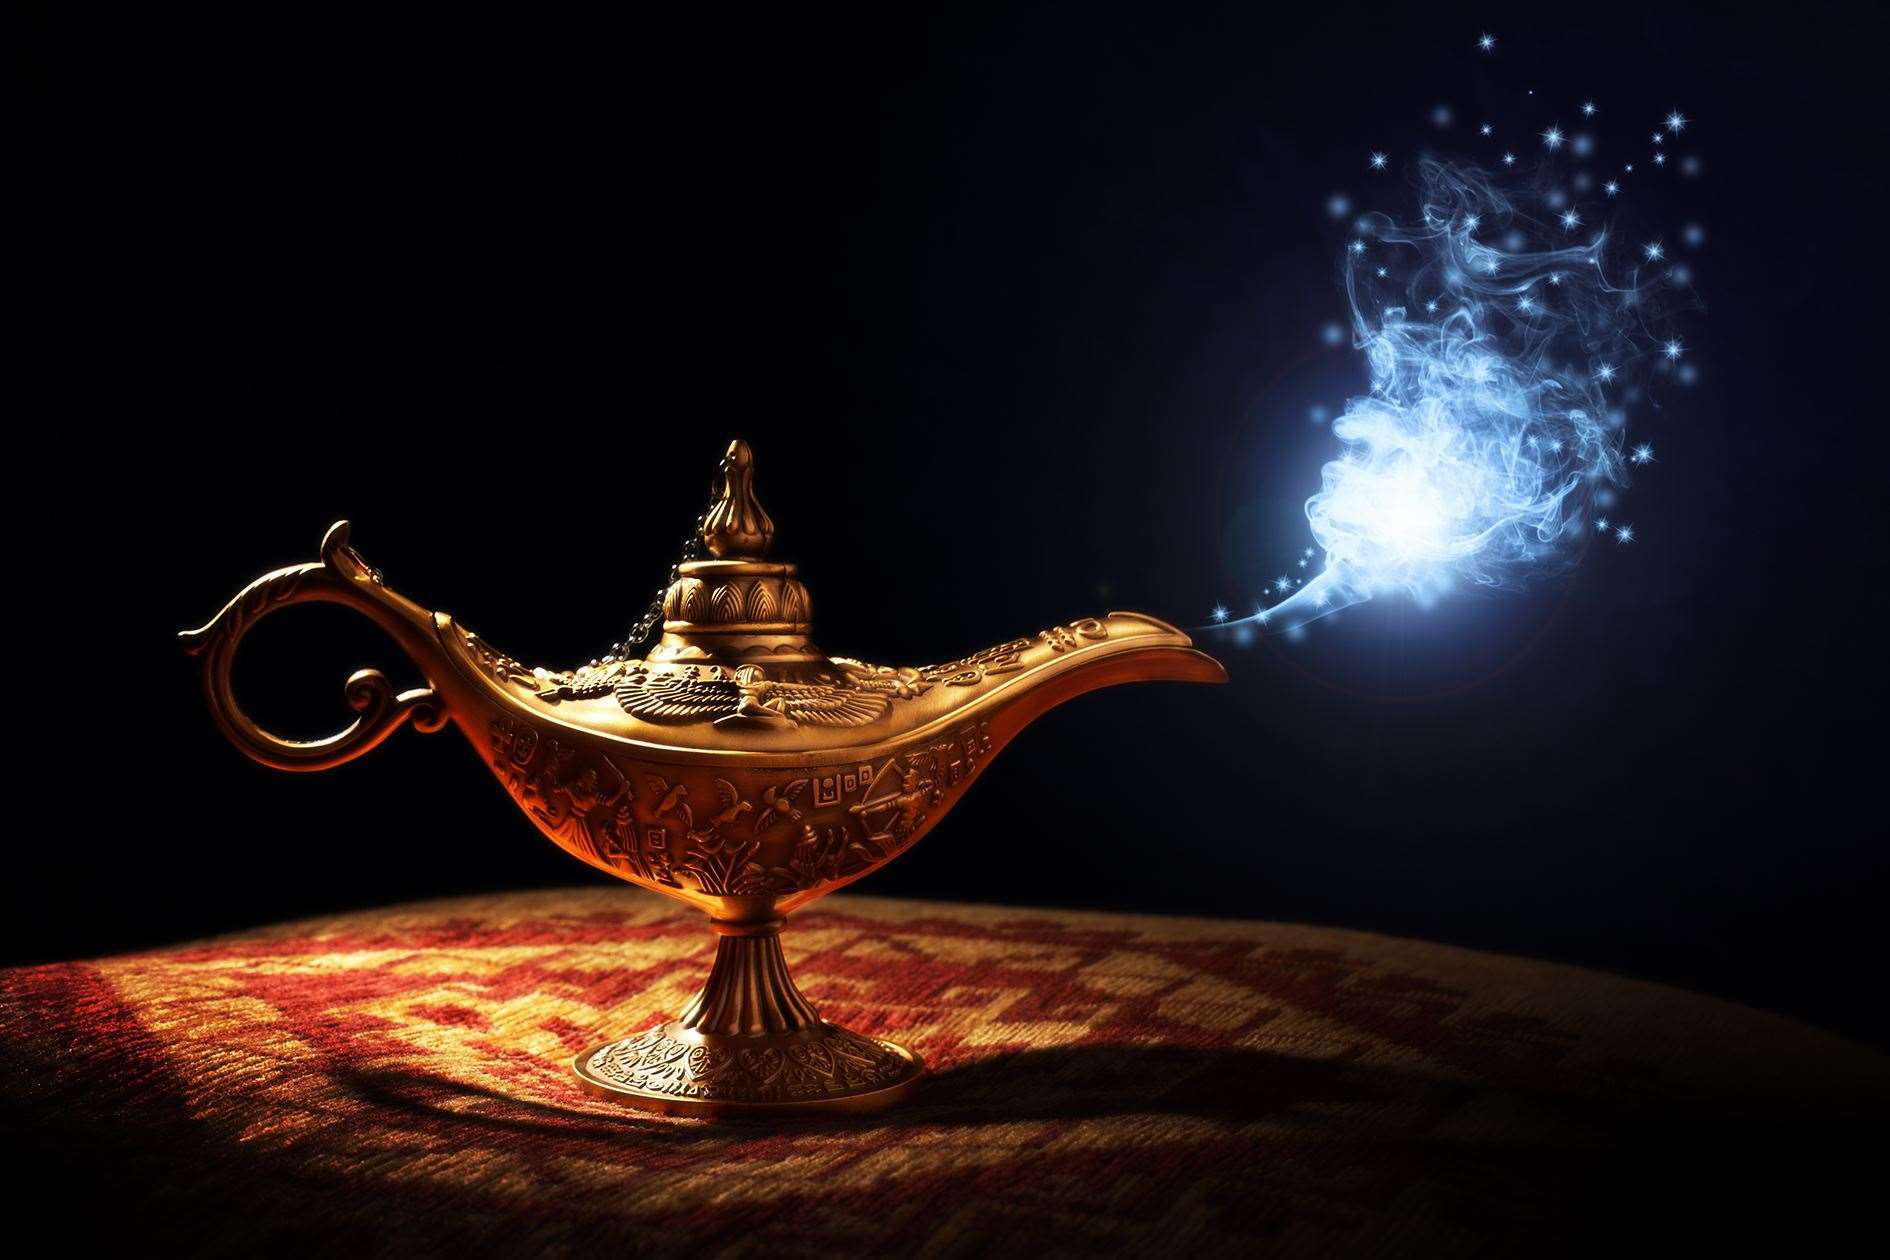 Nobody has a genie and magic lamp to grant wishes.